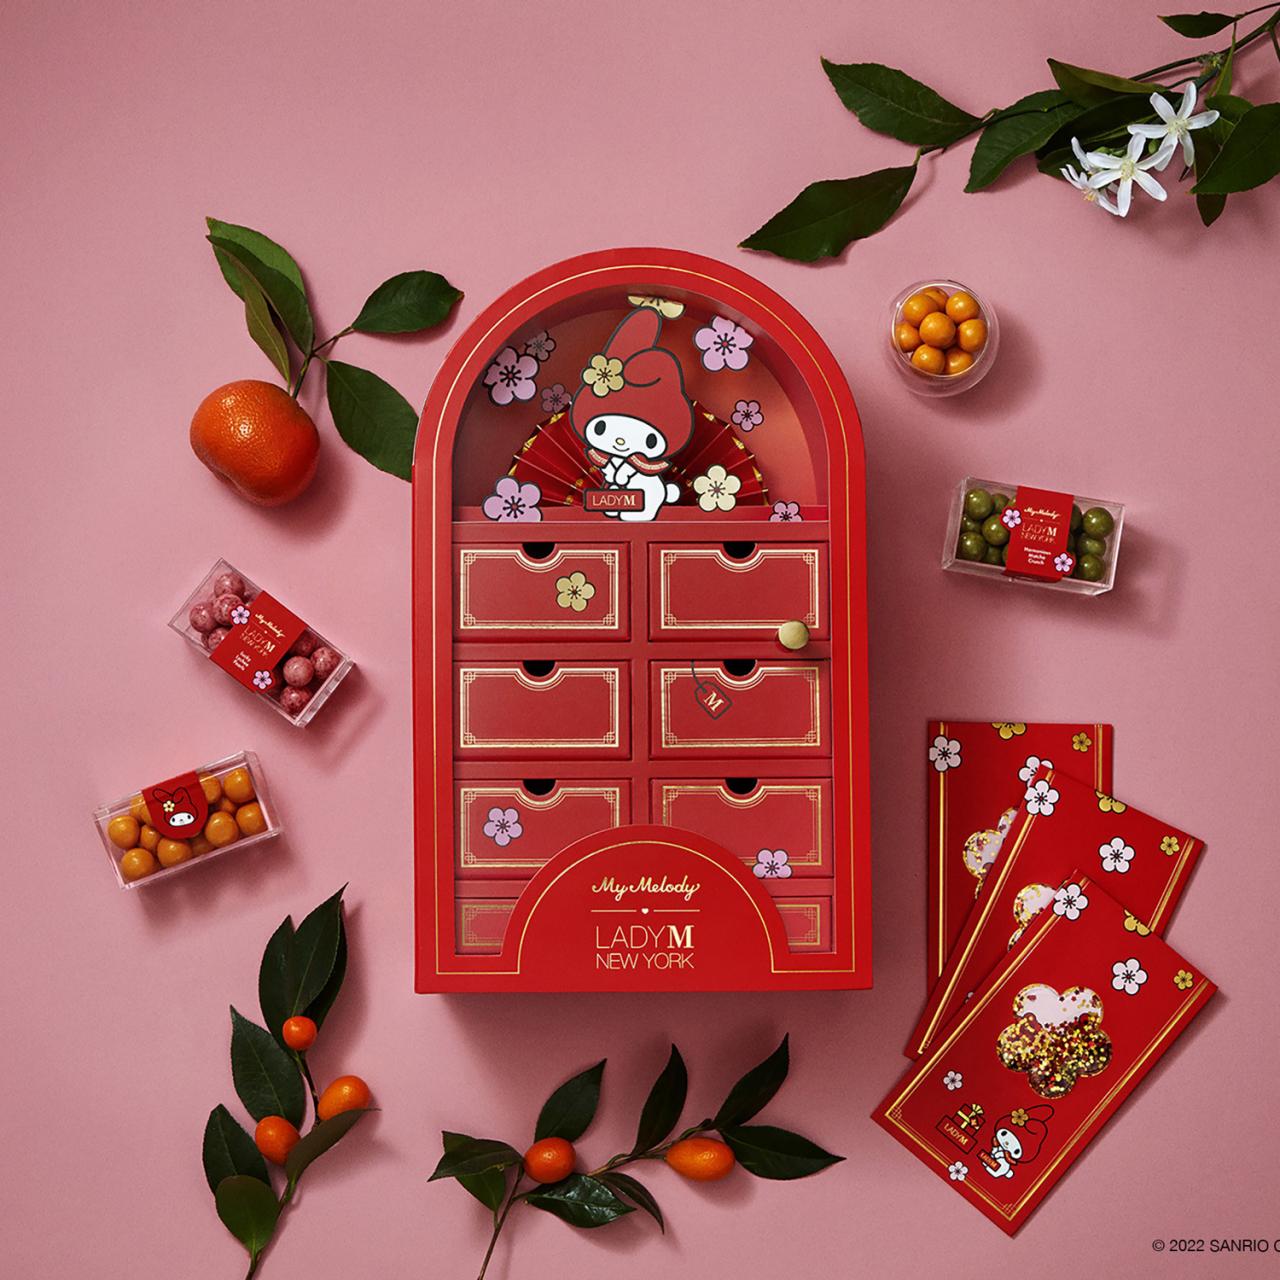 10 Pretty And Unique Red Packets We Want This Chinese New Year